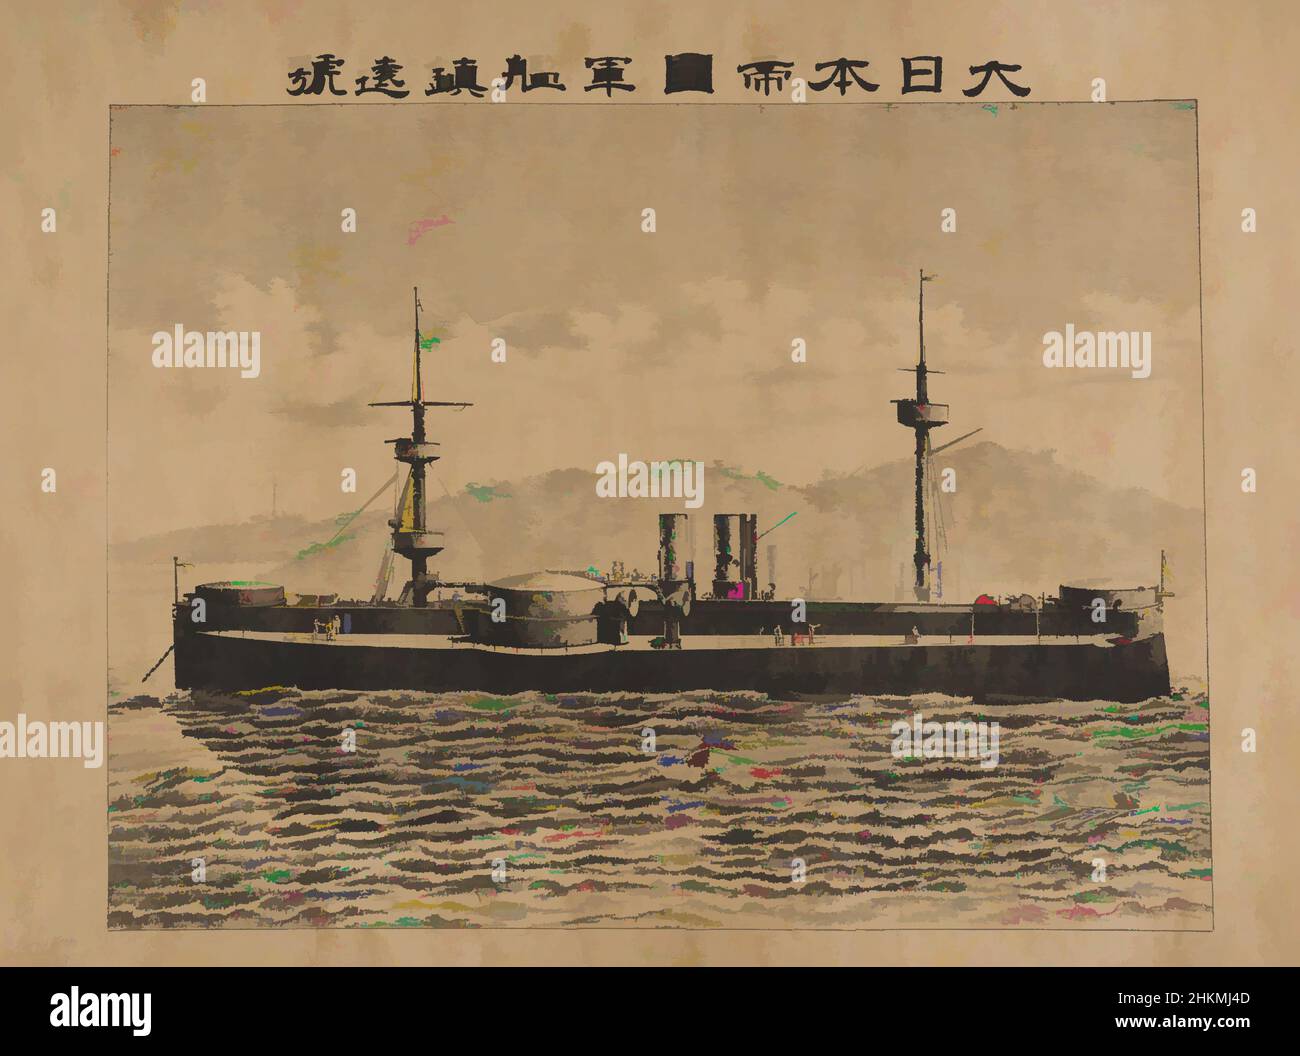 Art inspired by The Warship Chin’en of the Empire of Great Japan, Unknown, Meiji period, 1868–1912, Ariyama Teijiro, Japanese, active late 19th century, Saito Kunizo, Japanese, active late 19th–early 20th century, 1895, Lithograph, Made in Tokyo, Japan, Asia, Prints, sheet: 14 7/8 × 20, Classic works modernized by Artotop with a splash of modernity. Shapes, color and value, eye-catching visual impact on art. Emotions through freedom of artworks in a contemporary way. A timeless message pursuing a wildly creative new direction. Artists turning to the digital medium and creating the Artotop NFT Stock Photo